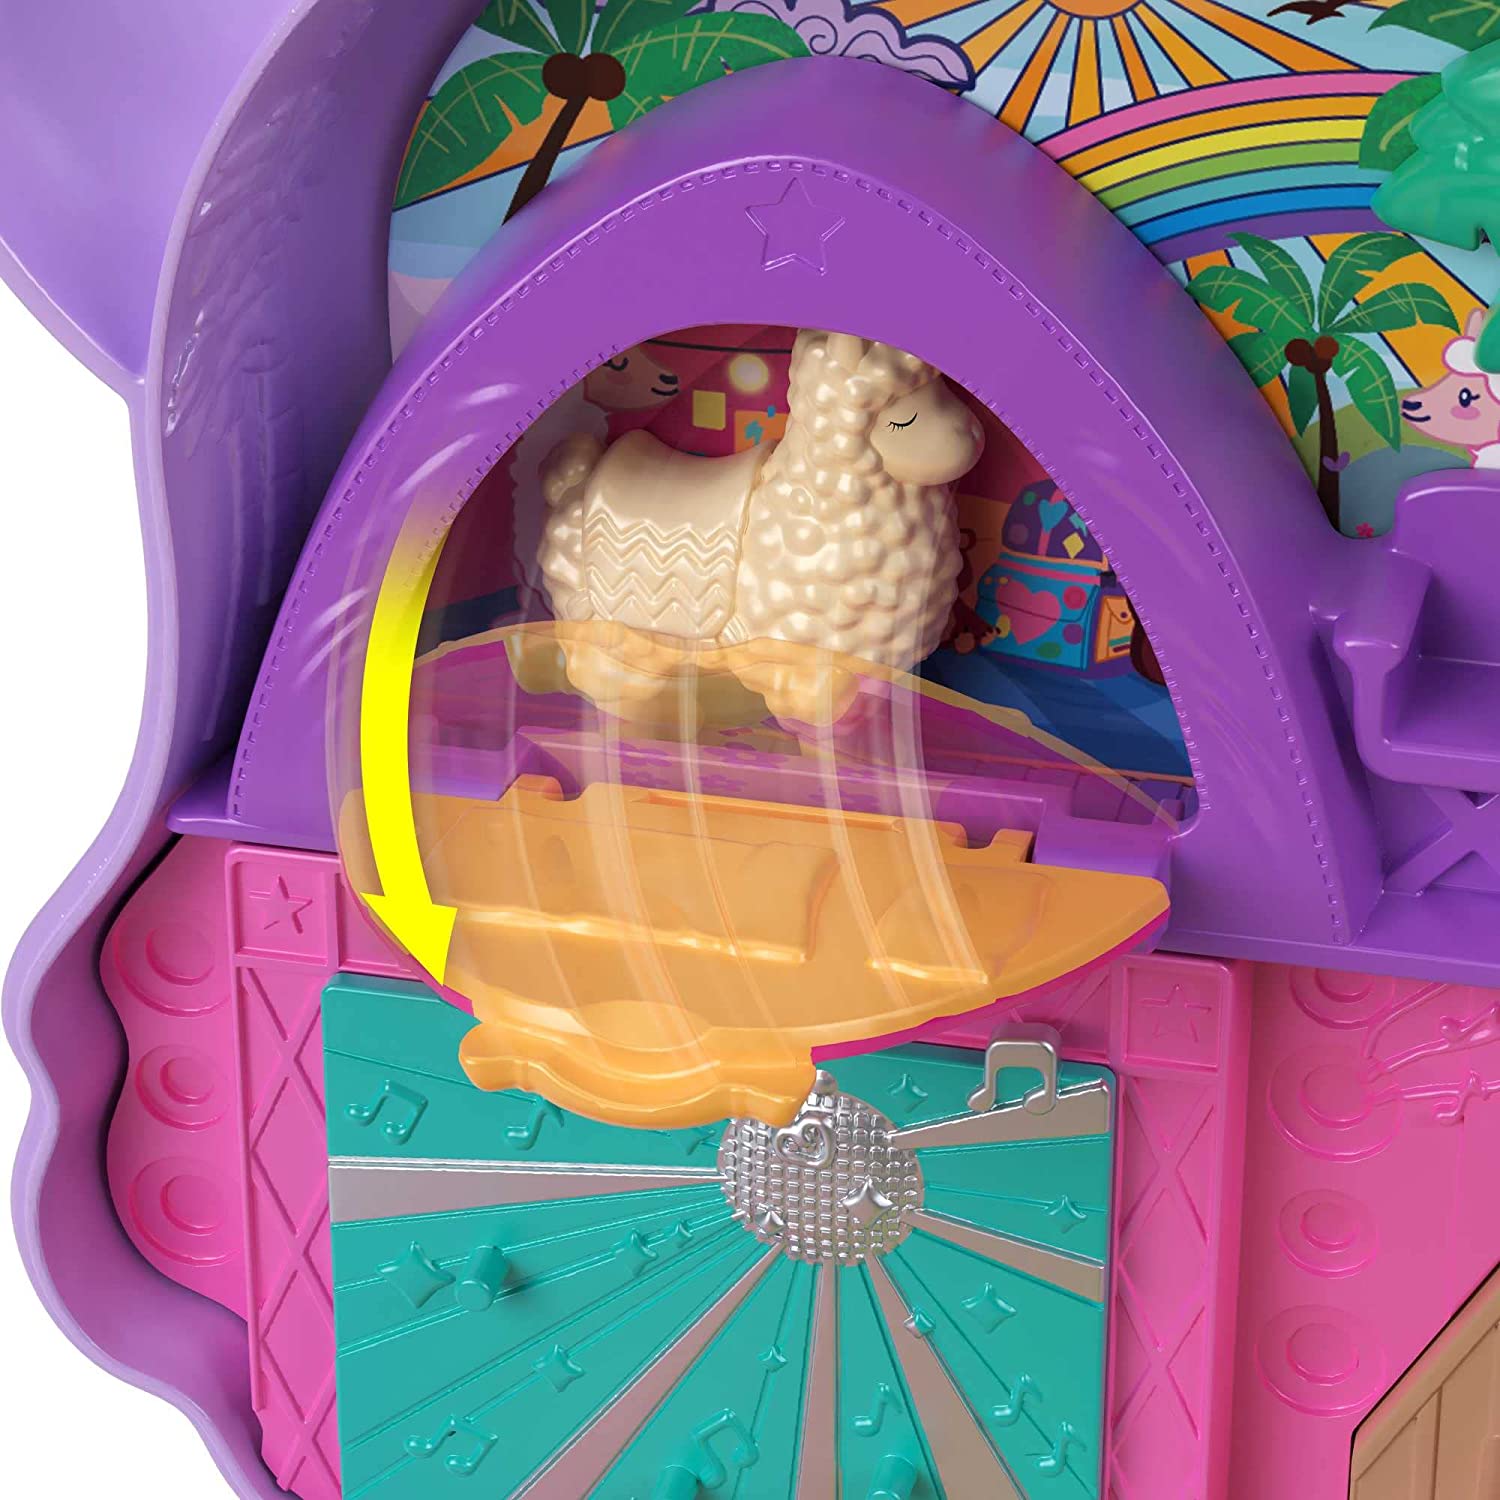 Polly Pocket Mini Toys, Camp Adventure Llama Compact Playset with 2 Micro Dolls and 13 Accessories, Pocket World Travel Toys with Surprise Reveals,